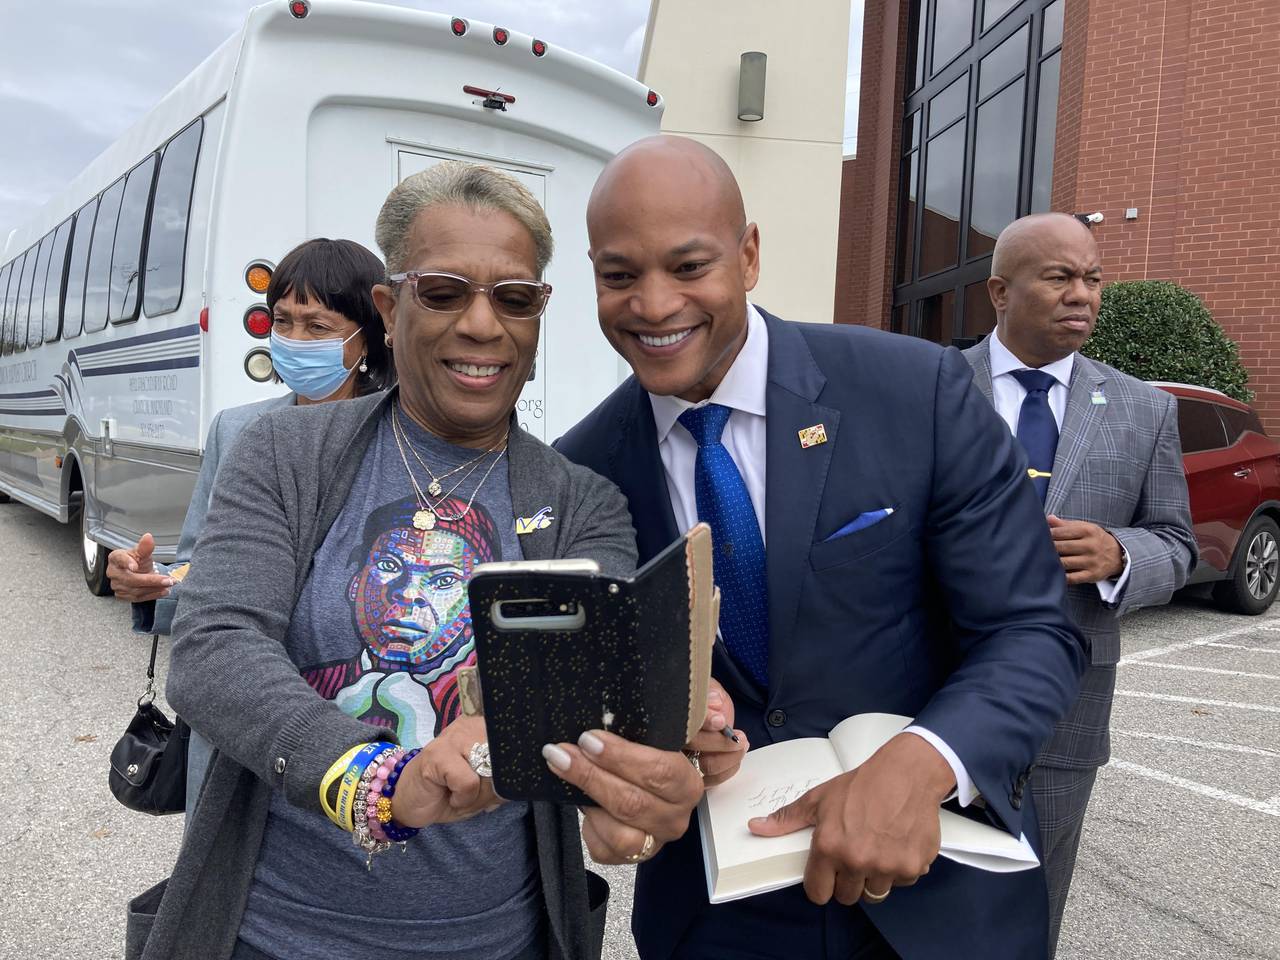 Maryland's Democratic nominee for governor Wes Moore poses for a selfie with Gwendolyn Briley-Strand while signing a book for her outside Mt. Ennon Baptist Church in Clinton on Sunday, Nov. 6, 2022. Ahead of Tuesday's Election Day, candidates are busy making their final pitches to voters.